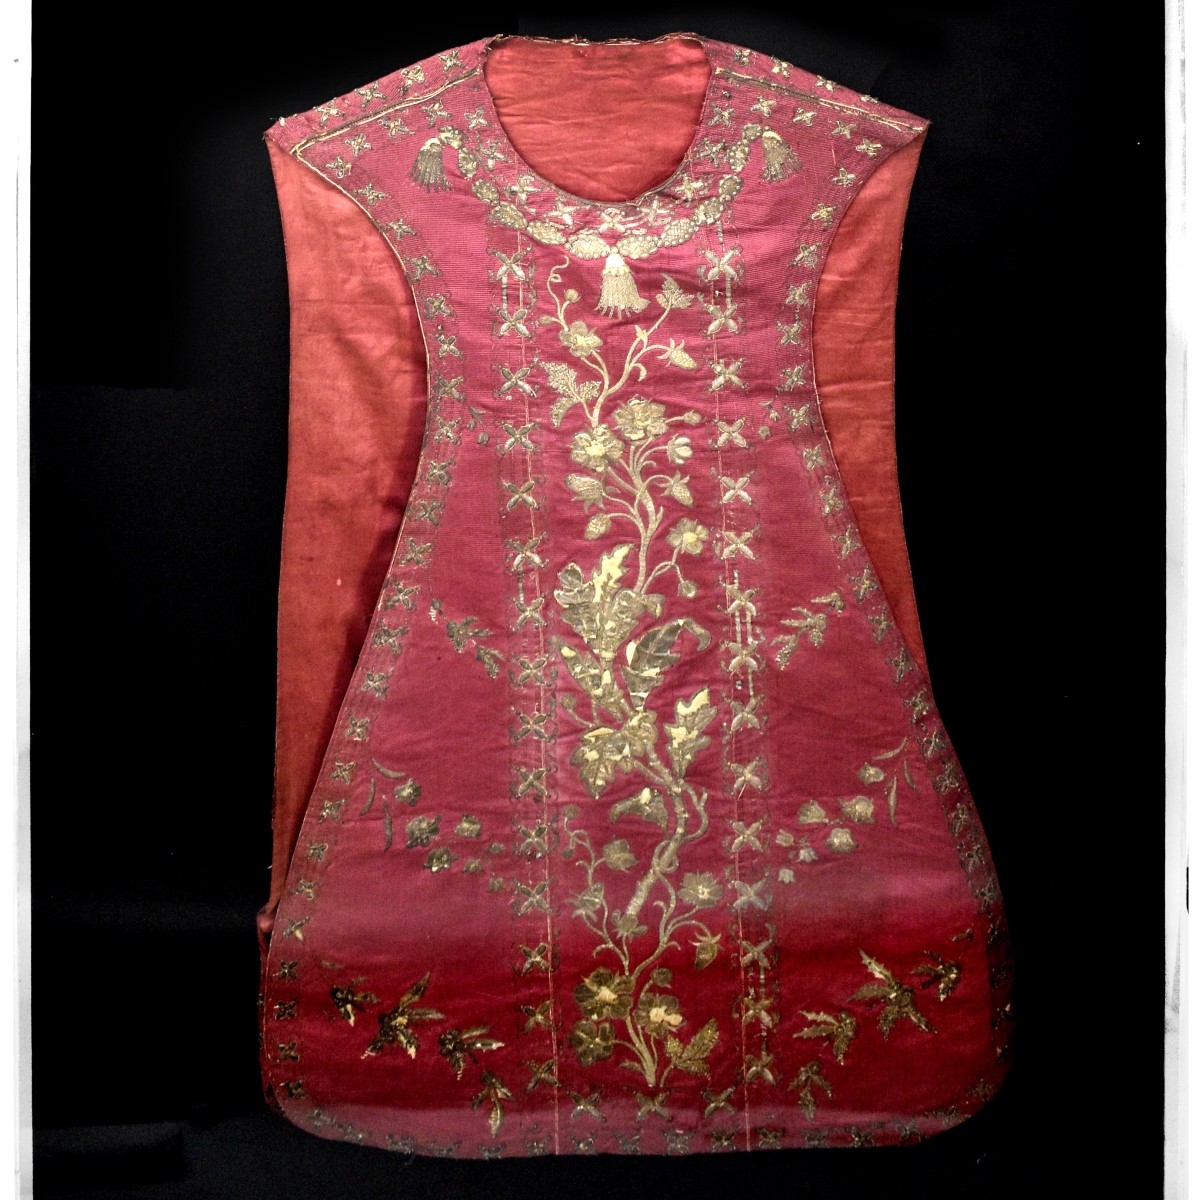 Antique Spanish Silk Embroidered Chasuble